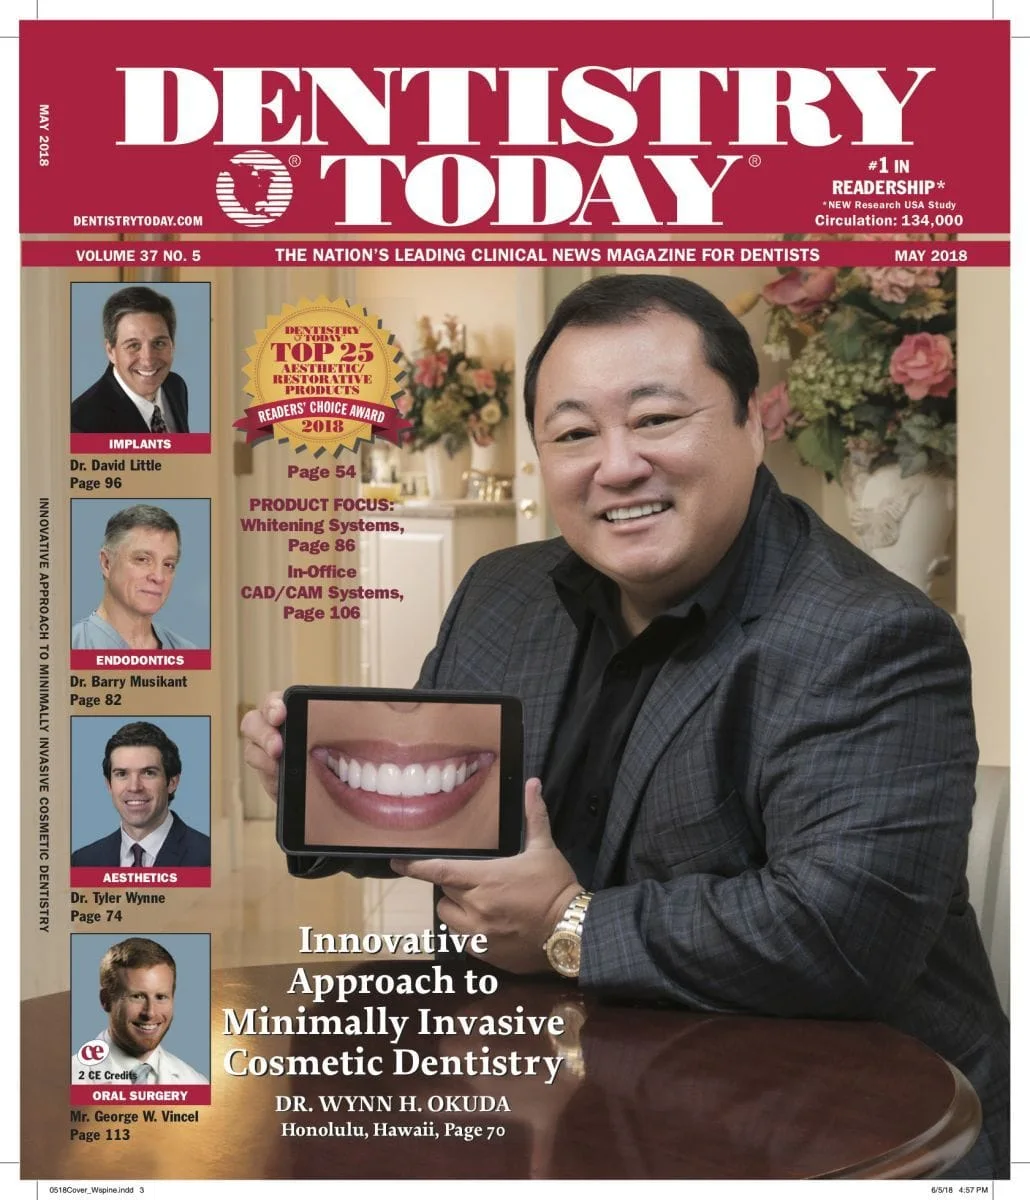 Dr. Okuda on the cover of Dentistry Today Magazine